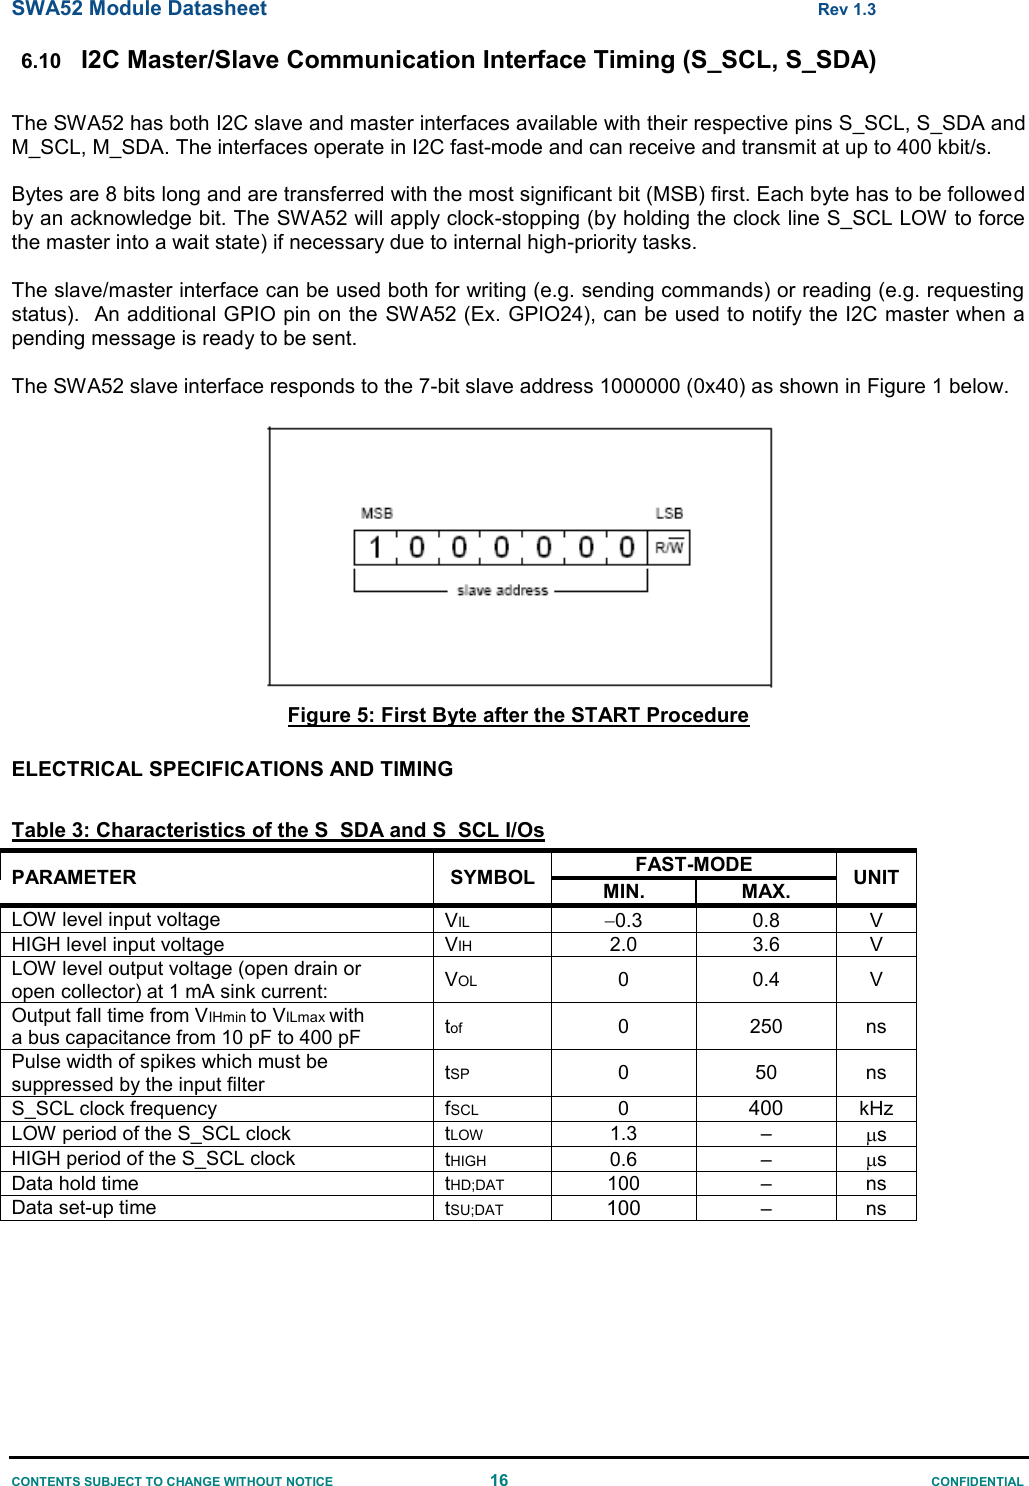 SWA52 Module Datasheet  Rev 1.3 CONTENTS SUBJECT TO CHANGE WITHOUT NOTICE  16  CONFIDENTIAL 6.10 I2C Master/Slave Communication Interface Timing (S_SCL, S_SDA)  The SWA52 has both I2C slave and master interfaces available with their respective pins S_SCL, S_SDA and M_SCL, M_SDA. The interfaces operate in I2C fast-mode and can receive and transmit at up to 400 kbit/s.  Bytes are 8 bits long and are transferred with the most significant bit (MSB) first. Each byte has to be followed by an acknowledge bit. The SWA52 will apply clock-stopping (by holding the clock line S_SCL LOW to force the master into a wait state) if necessary due to internal high-priority tasks.  The slave/master interface can be used both for writing (e.g. sending commands) or reading (e.g. requesting status).  An additional GPIO pin on the SWA52 (Ex. GPIO24), can be used to notify the I2C master when a pending message is ready to be sent.  The SWA52 slave interface responds to the 7-bit slave address 1000000 (0x40) as shown in Figure 1 below.   Figure 5: First Byte after the START Procedure  ELECTRICAL SPECIFICATIONS AND TIMING  Table 3: Characteristics of the S_SDA and S_SCL I/Os PARAMETER SYMBOL FAST-MODE UNIT MIN. MAX. LOW level input voltage VIL 0.3 0.8 V HIGH level input voltage VIH 2.0 3.6 V LOW level output voltage (open drain or open collector) at 1 mA sink current: VOL 0 0.4 V Output fall time from VIHmin to VILmax with a bus capacitance from 10 pF to 400 pF tof 0 250 ns Pulse width of spikes which must be suppressed by the input filter tSP 0 50 ns S_SCL clock frequency  fSCL 0 400 kHz LOW period of the S_SCL clock tLOW 1.3 – s HIGH period of the S_SCL clock tHIGH 0.6 – s Data hold time tHD;DAT 100 – ns Data set-up time tSU;DAT 100 – ns  